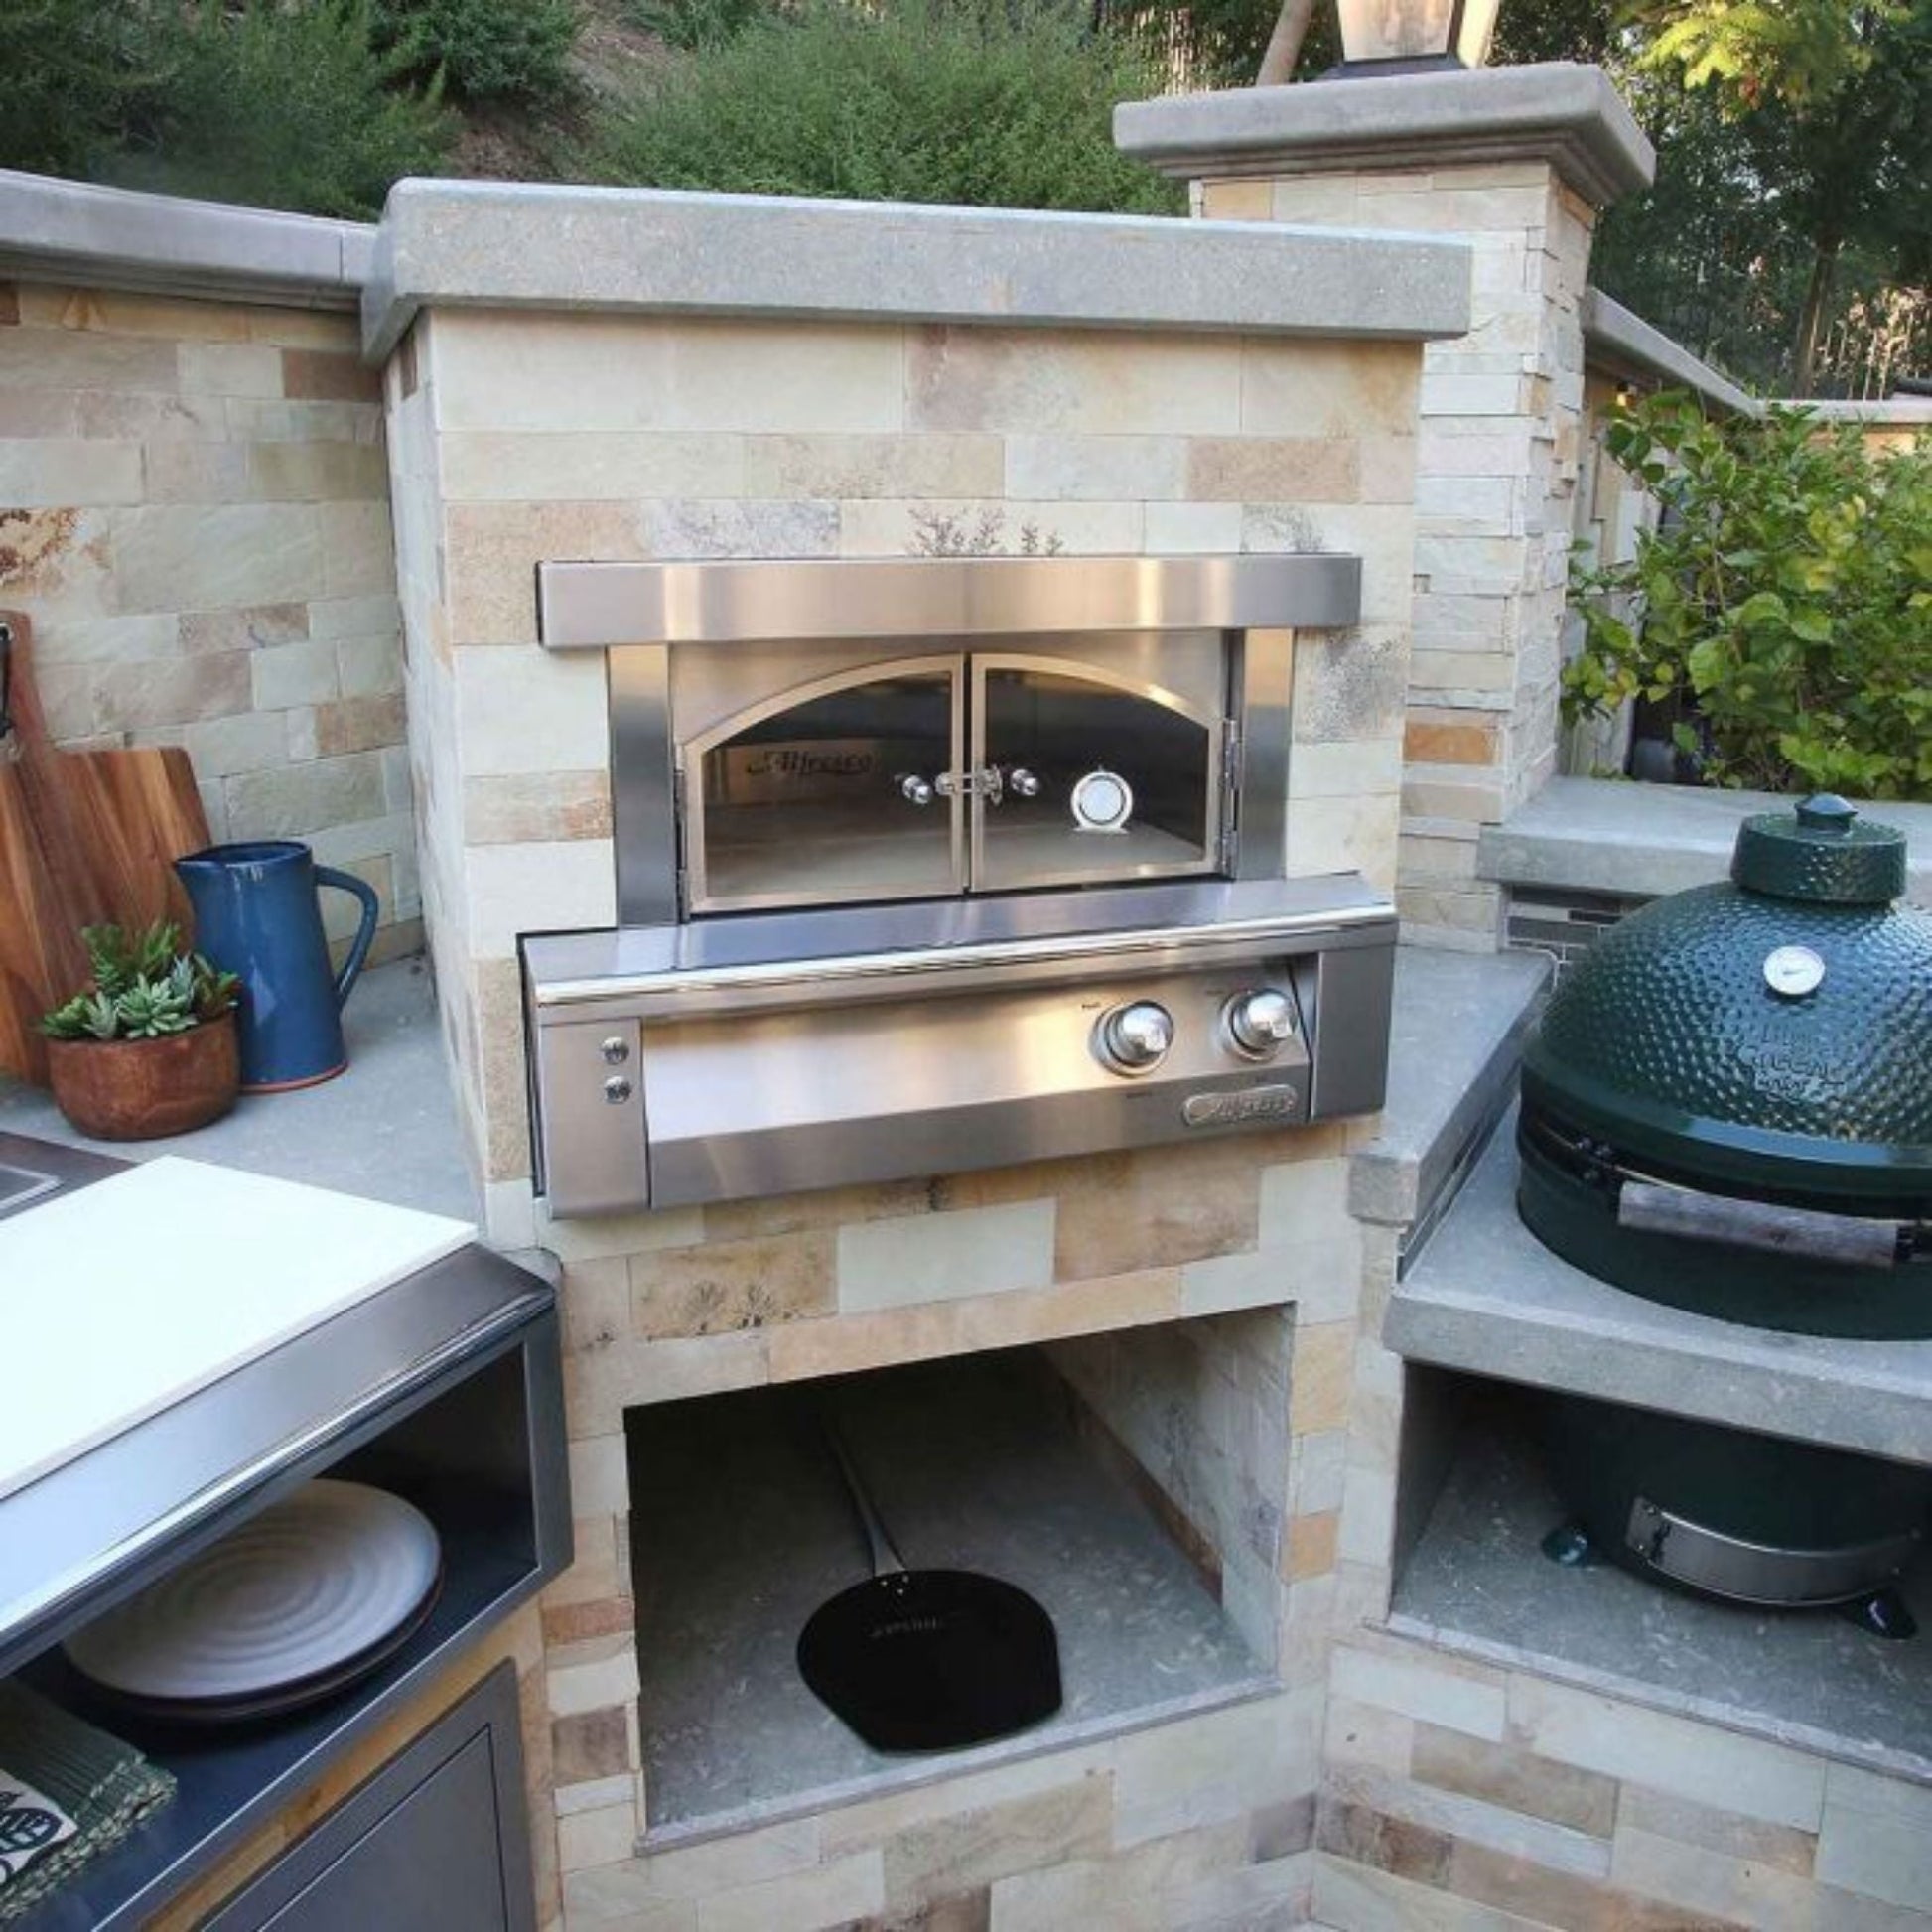 Alfresco 30" Ultramarine Blue Gloss Natural Gas Pizza Oven for Built-in Installations